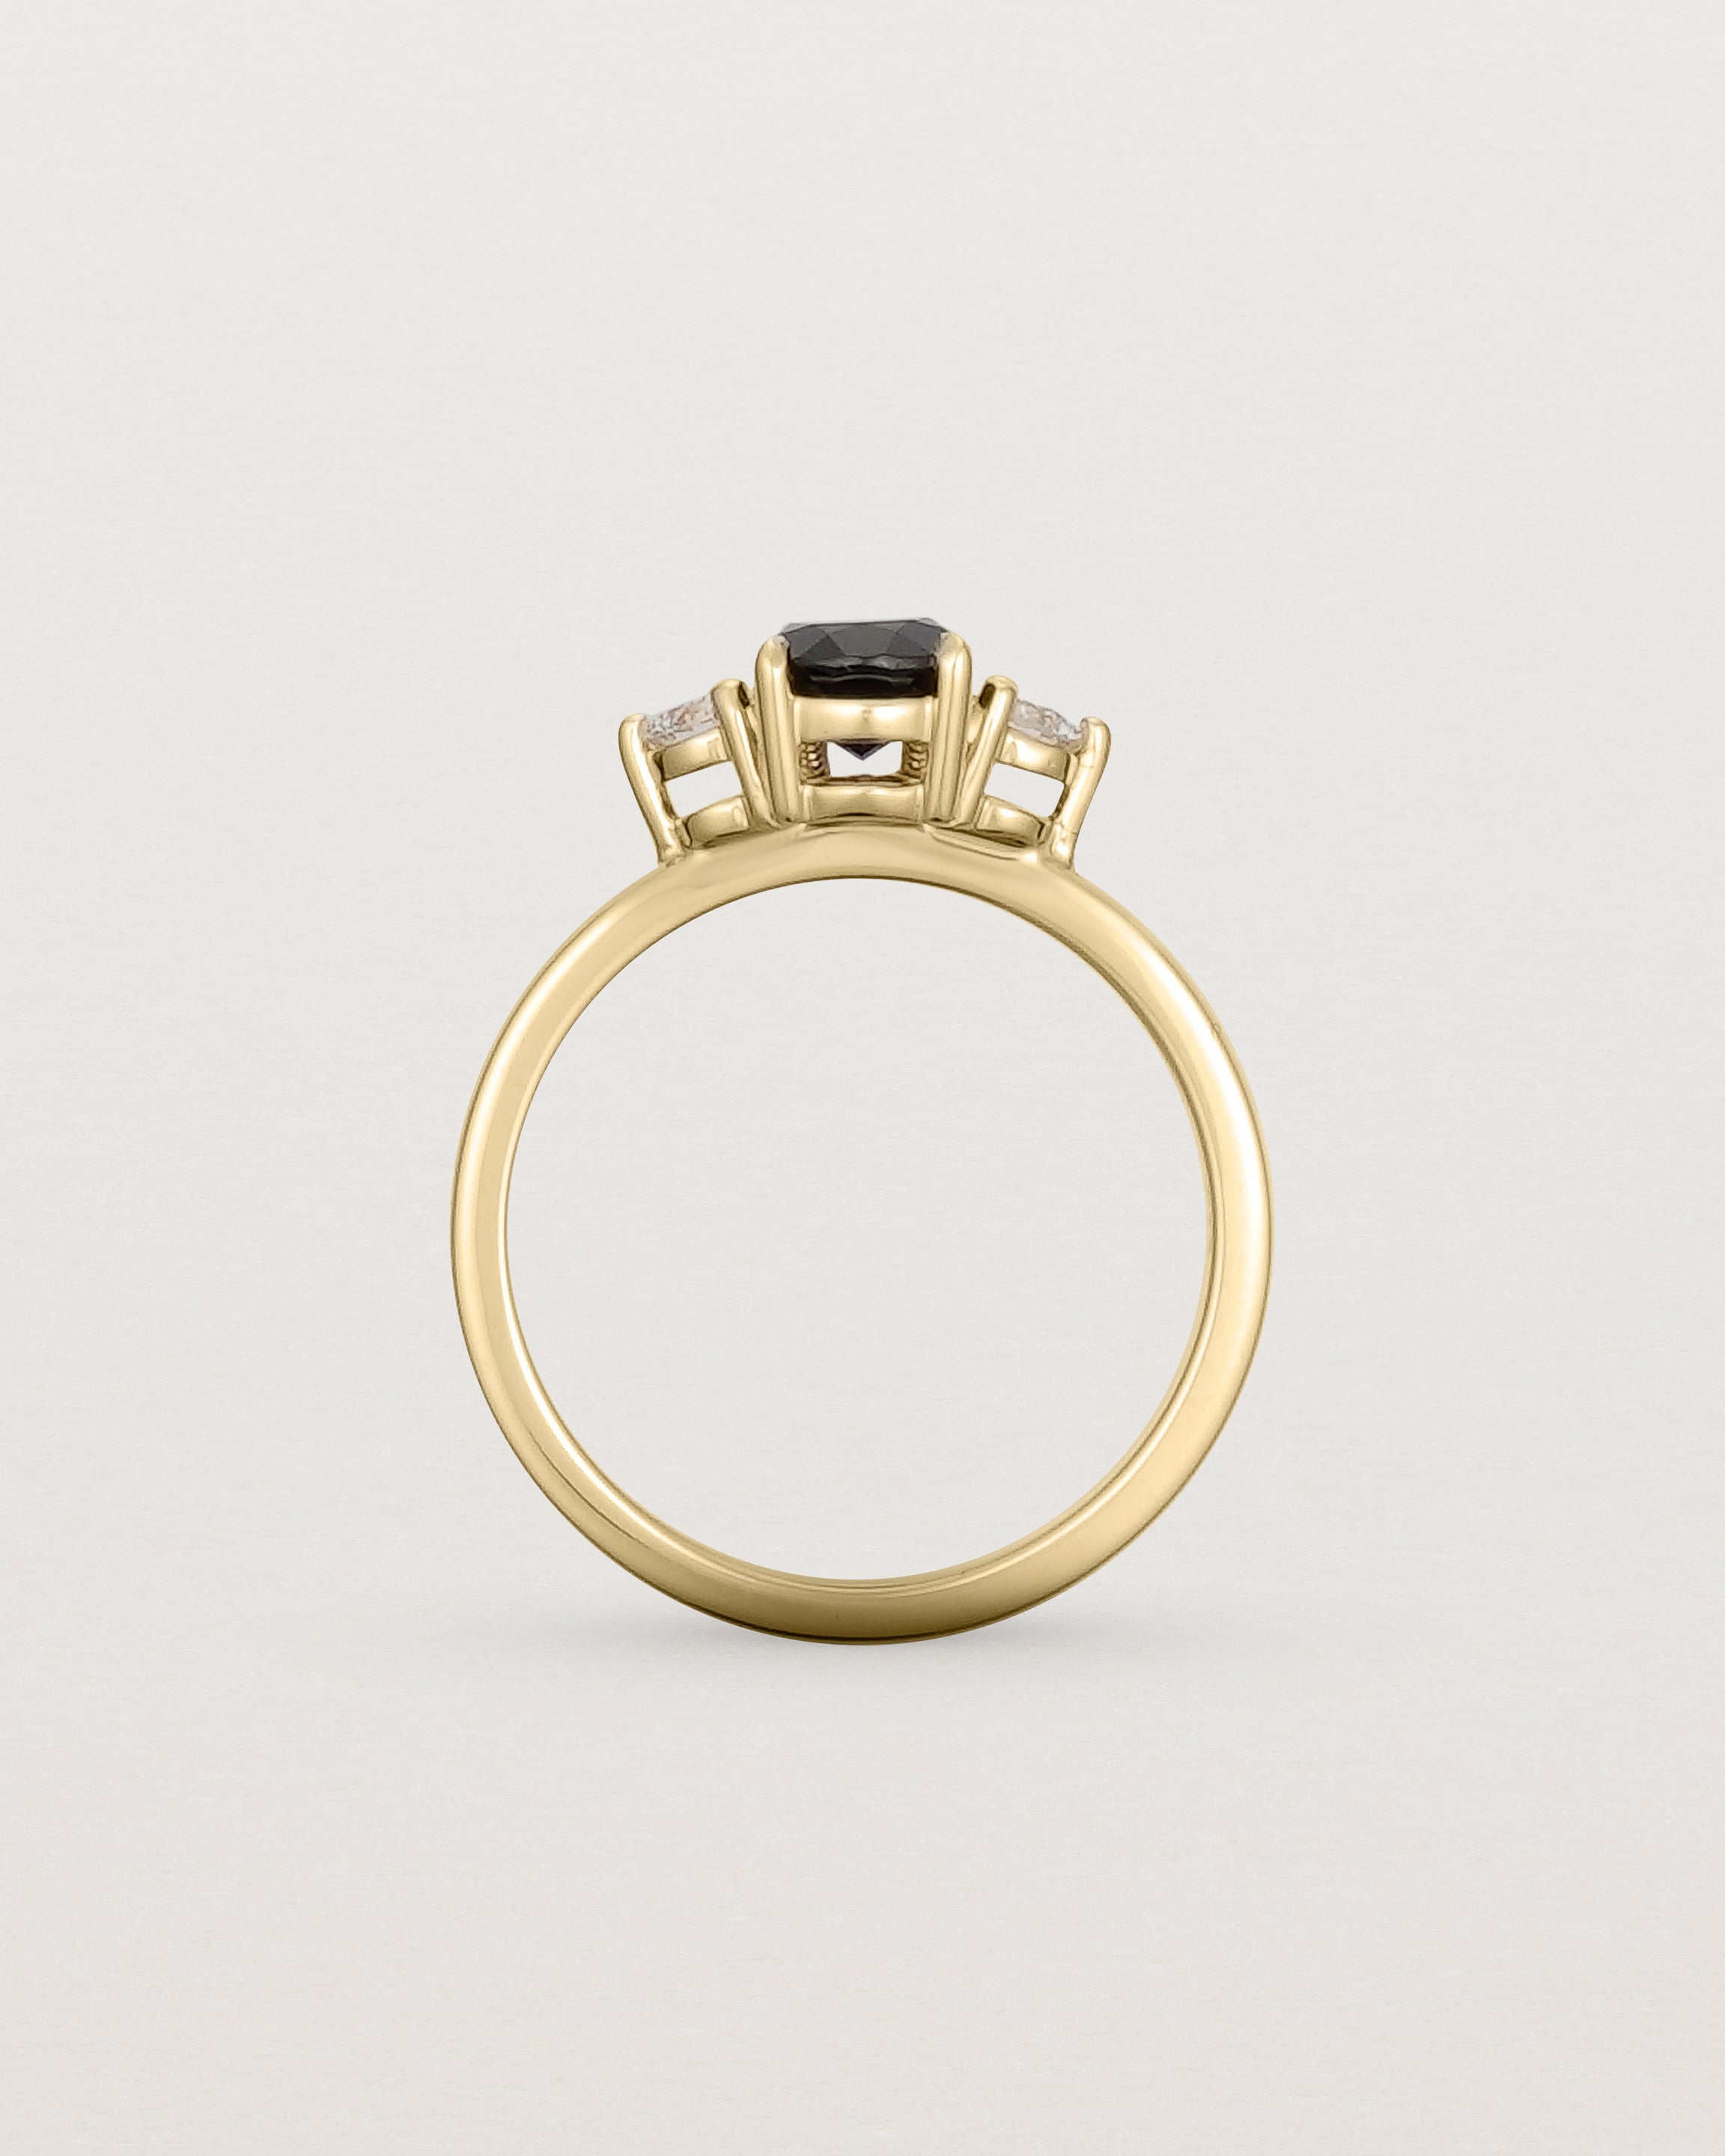 Standing view of the Una Pear Trio Ring | Black Spinel & Diamonds | Yellow Gold.